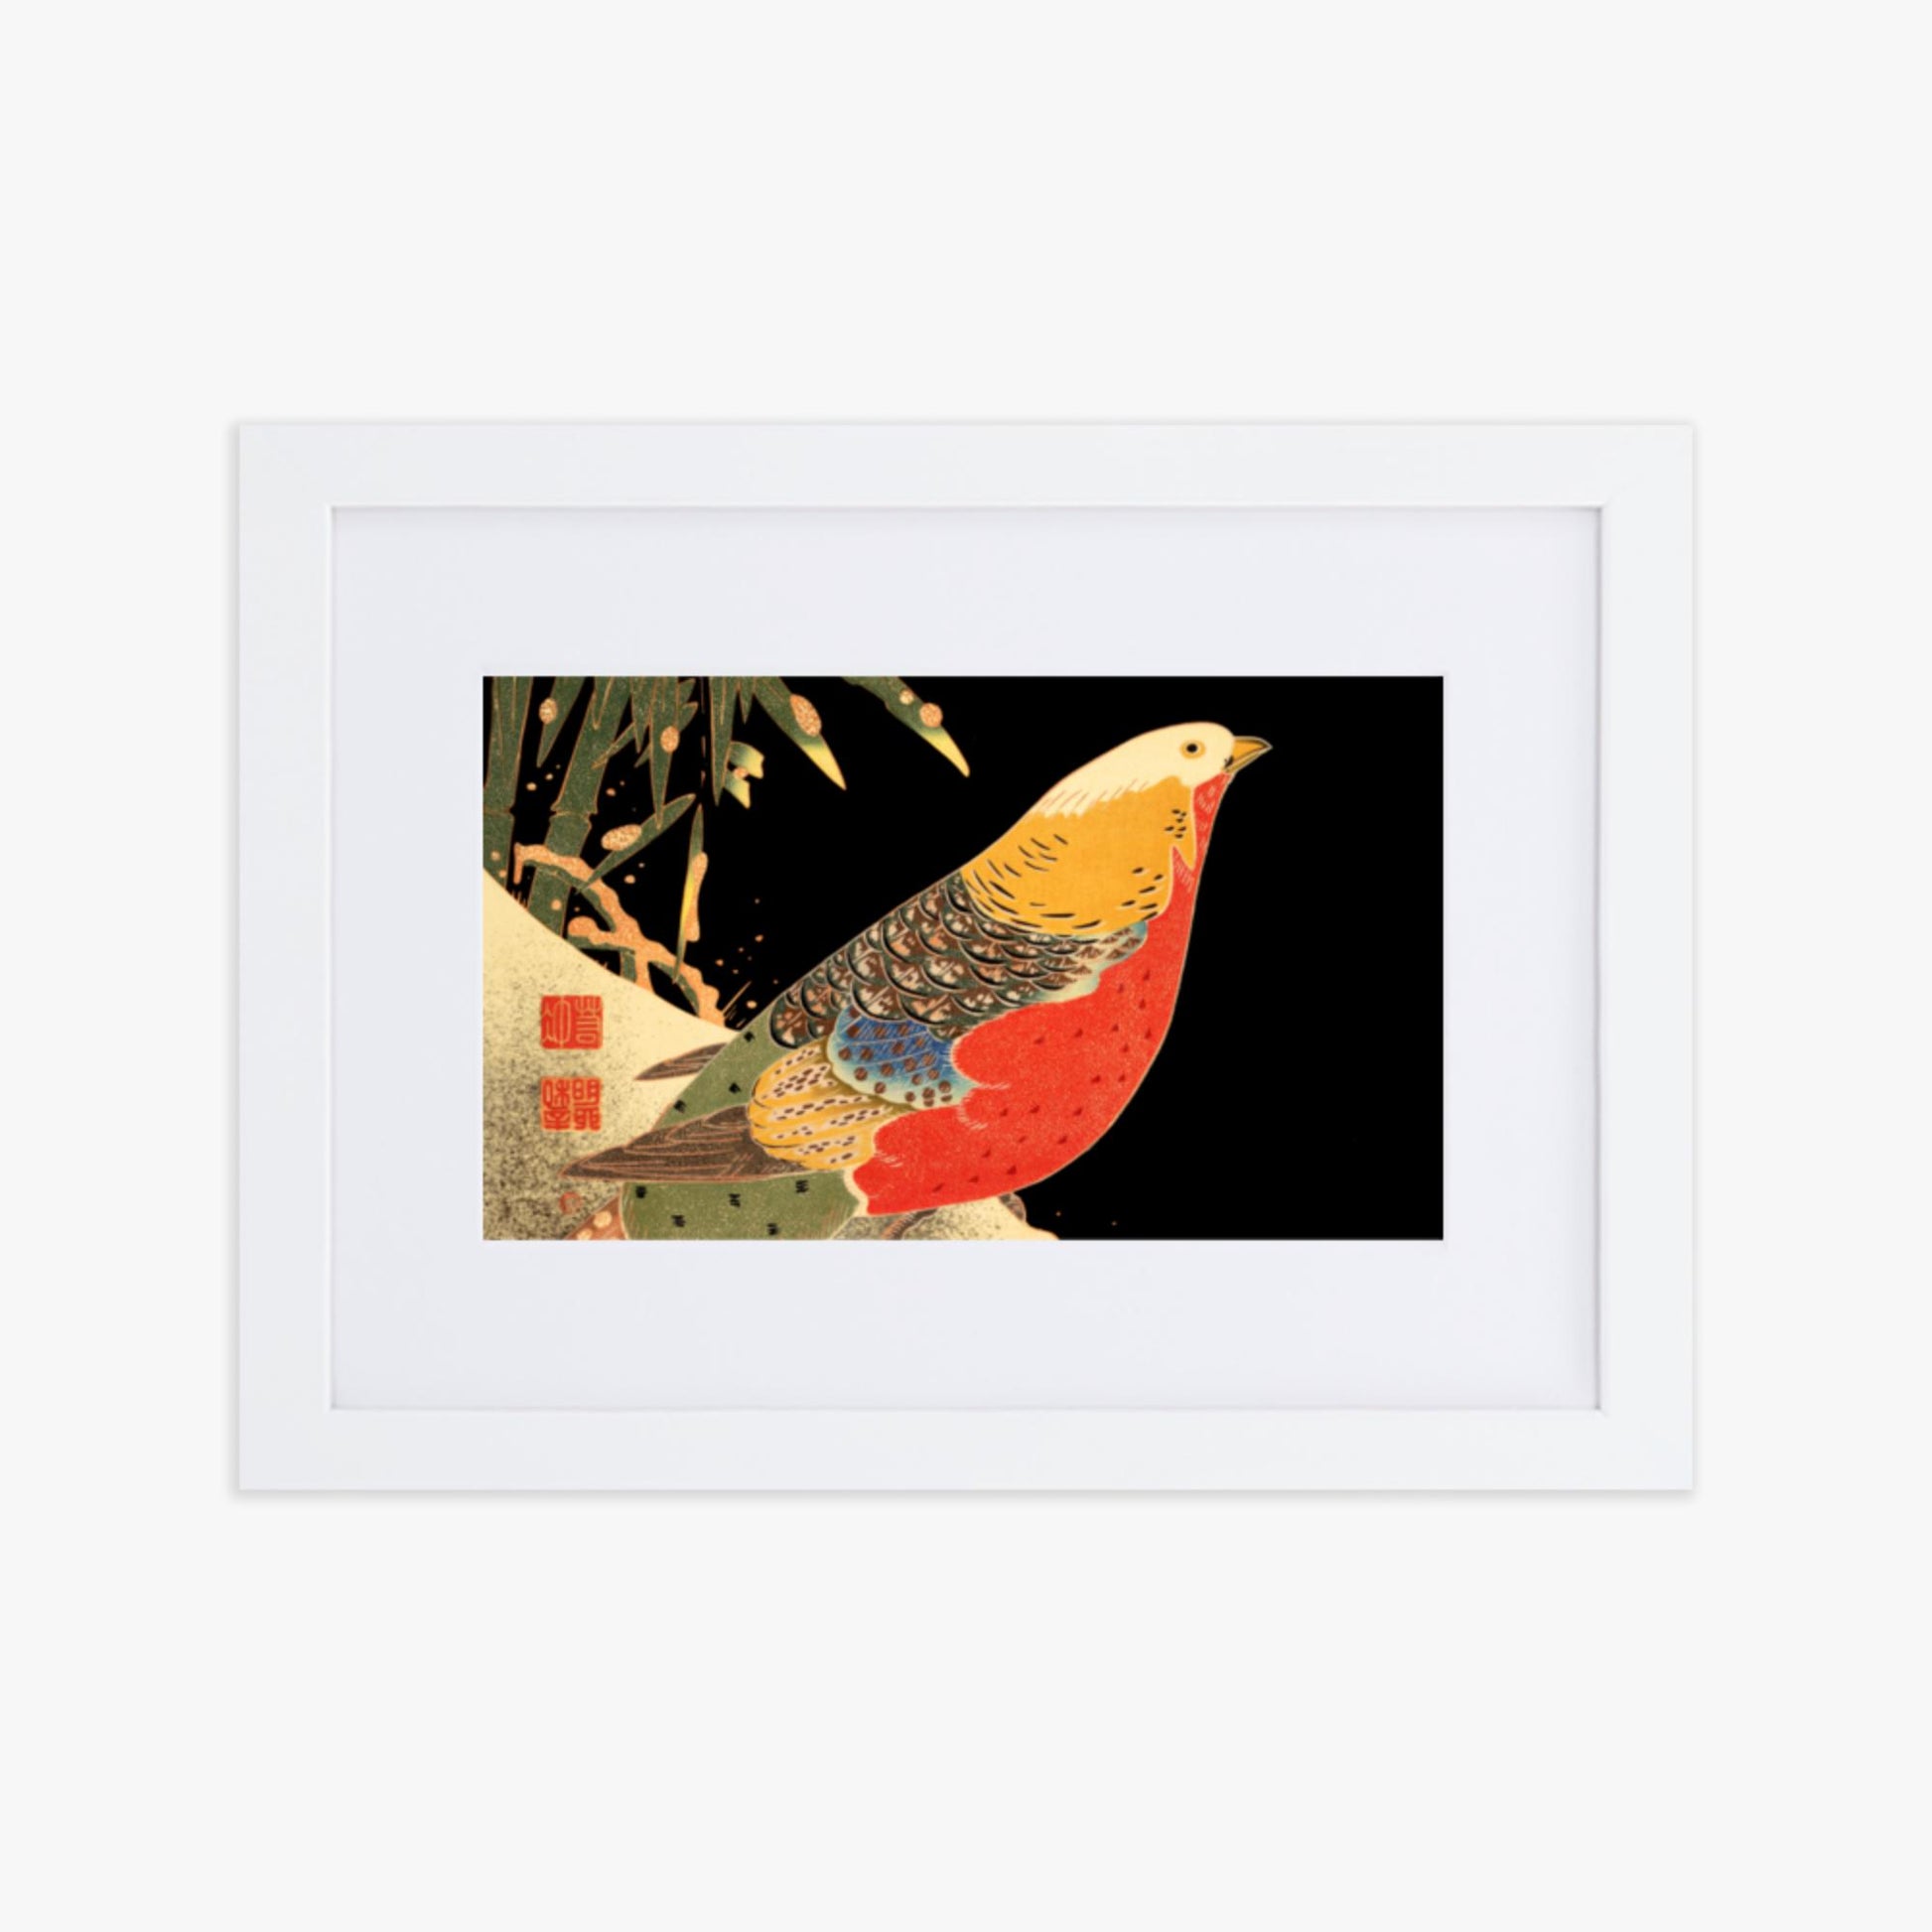 Ito Jakuchu - Golden Pheasant in the Snow 21x30 cm Poster With White Frame